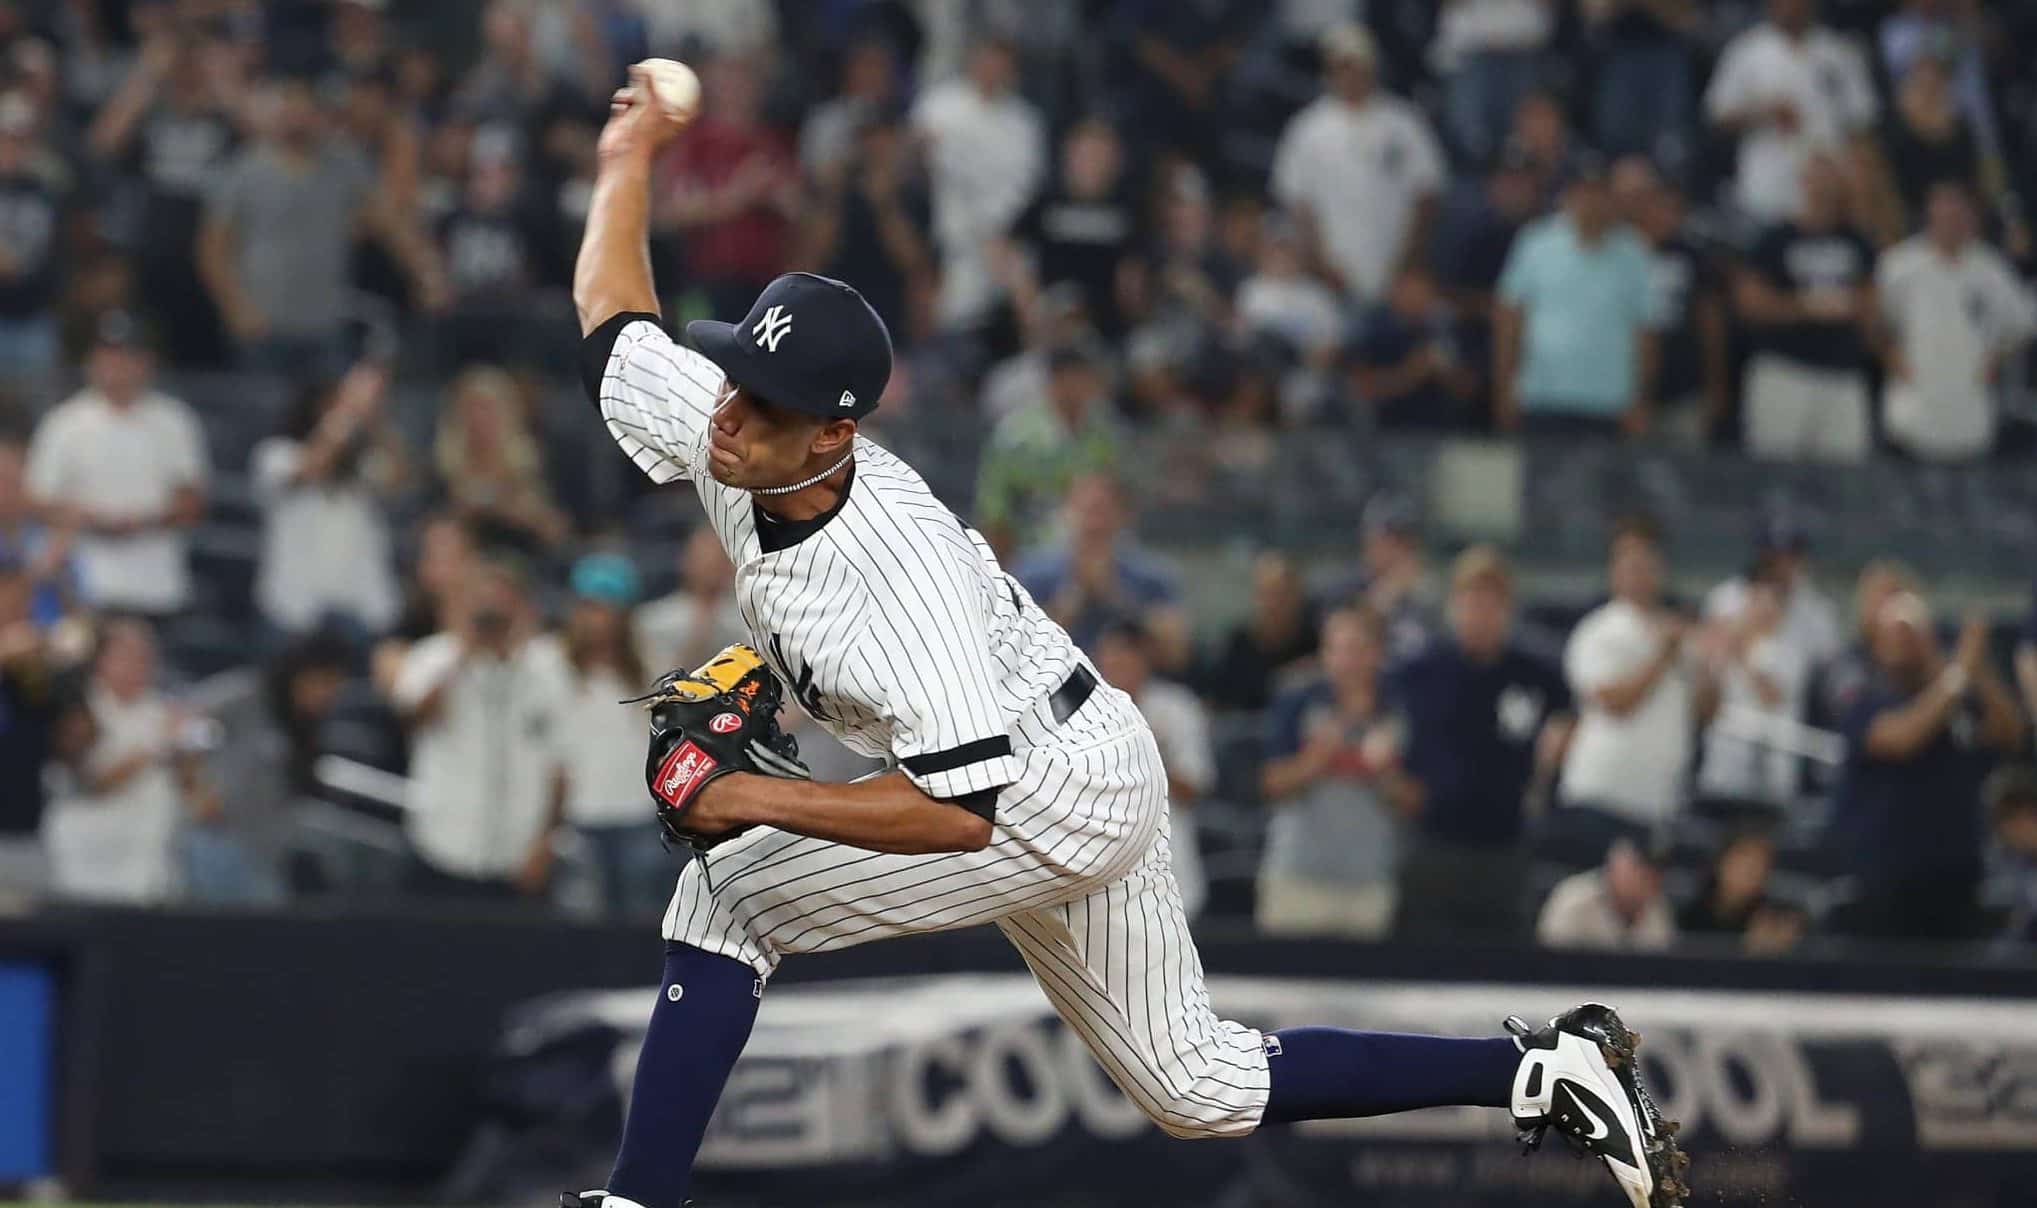 NEW YORK, NEW YORK - AUGUST 11: Adonis Rosa #73 of the New York Yankees makes his Major League debut pitching against the Baltimore Orioles during their game at Yankee Stadium on August 11, 2019 in New York City.